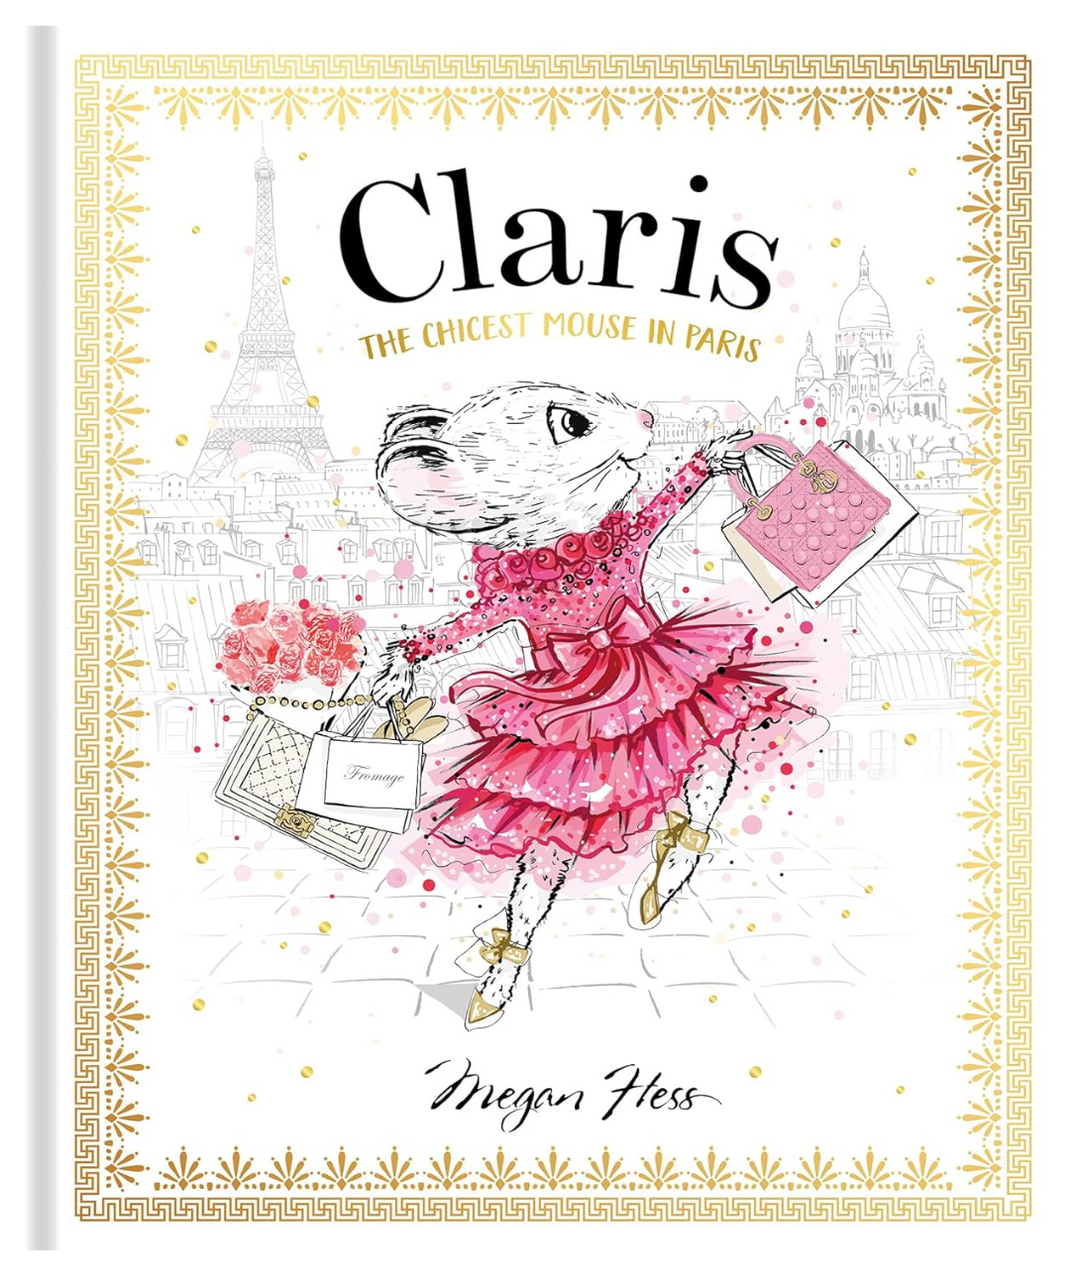 Claris the Chicest Mouse in Paris